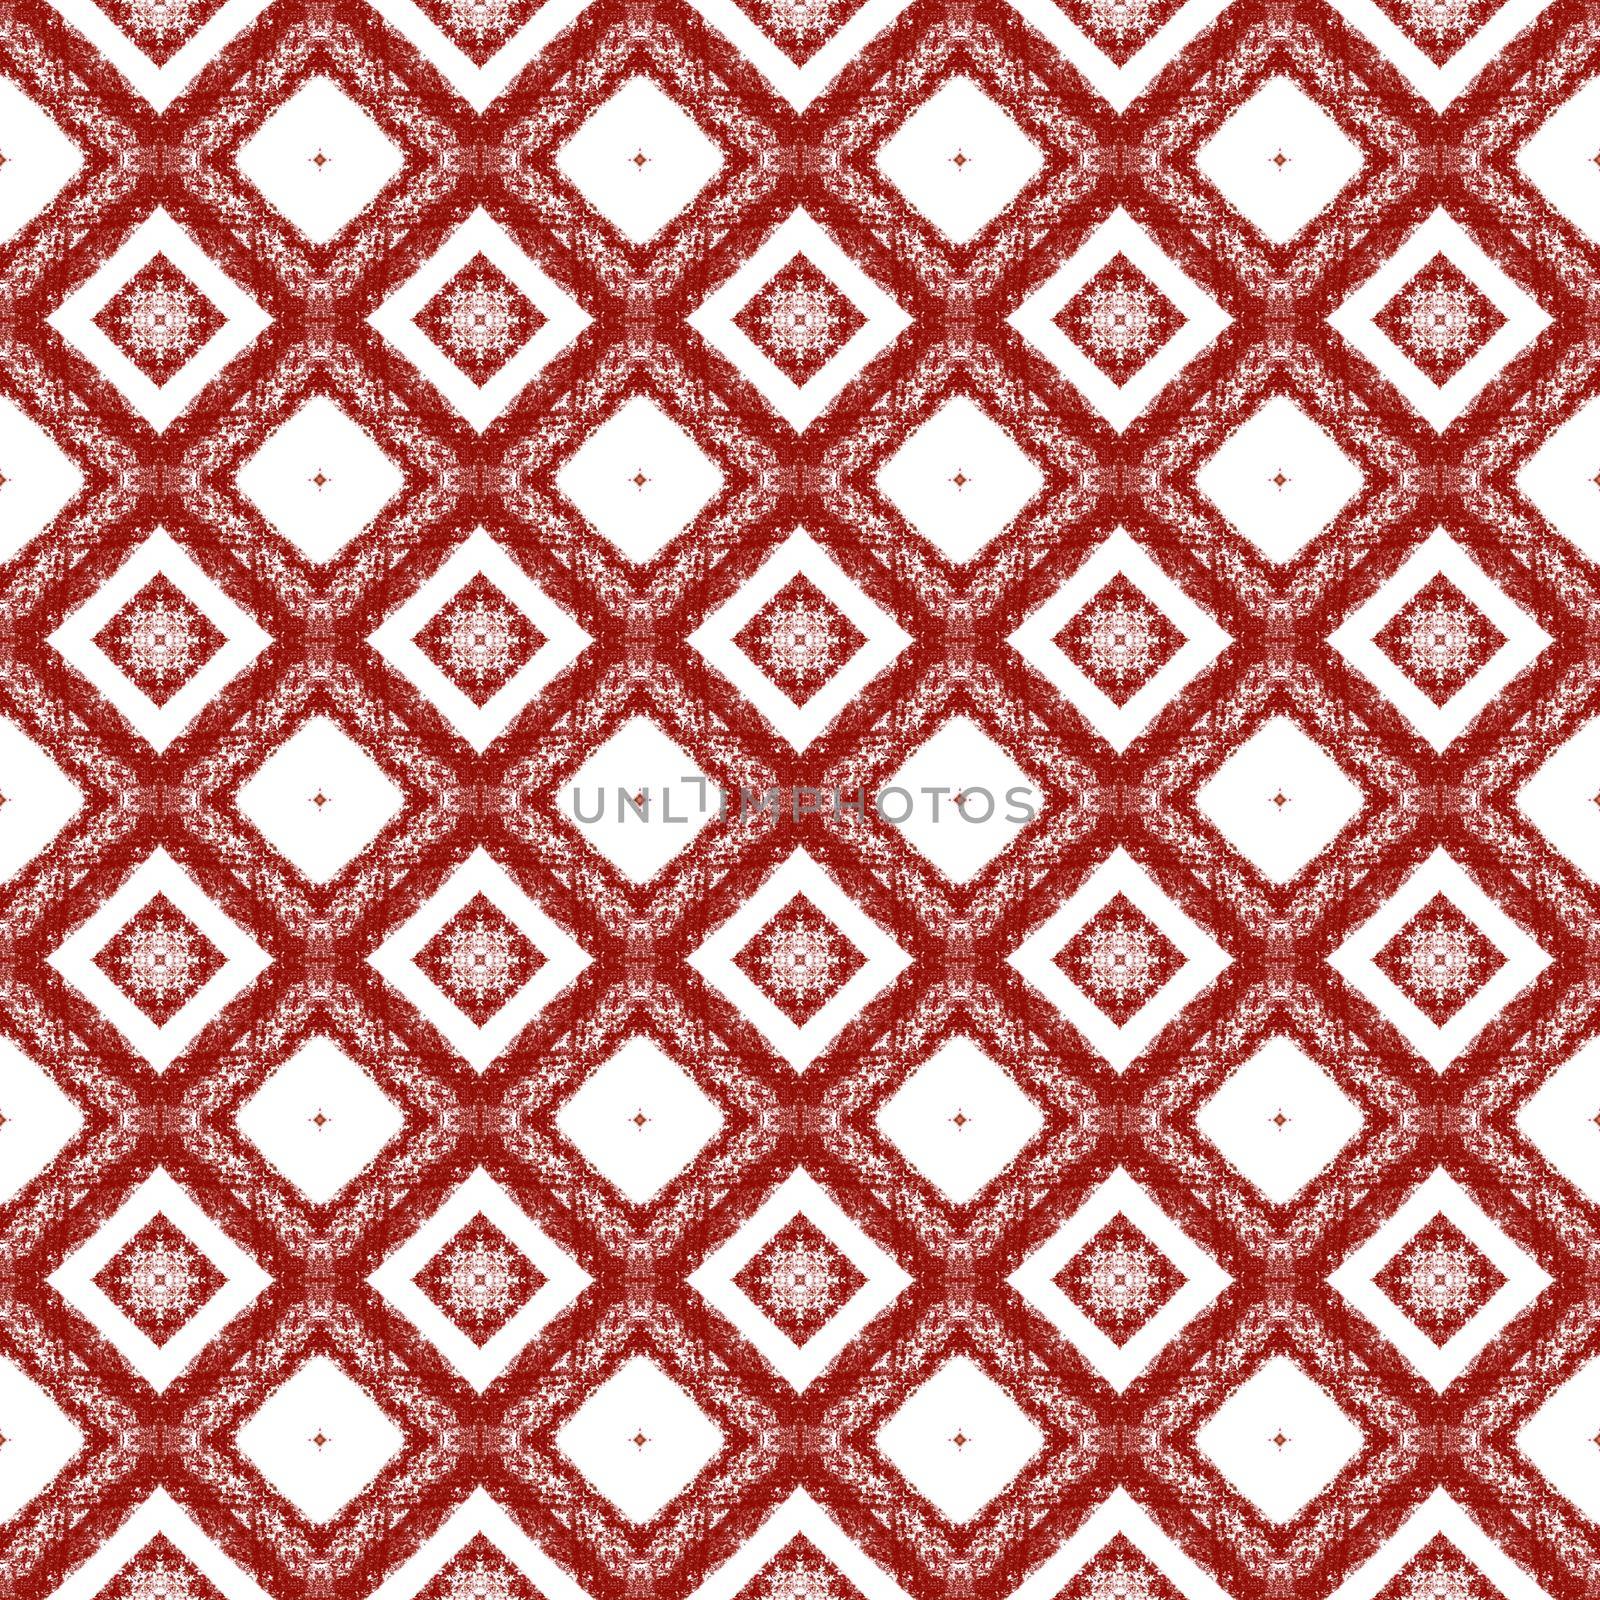 Ethnic hand painted pattern. Maroon symmetrical kaleidoscope background. Textile ready lovely print, swimwear fabric, wallpaper, wrapping. Summer dress ethnic hand painted tile.